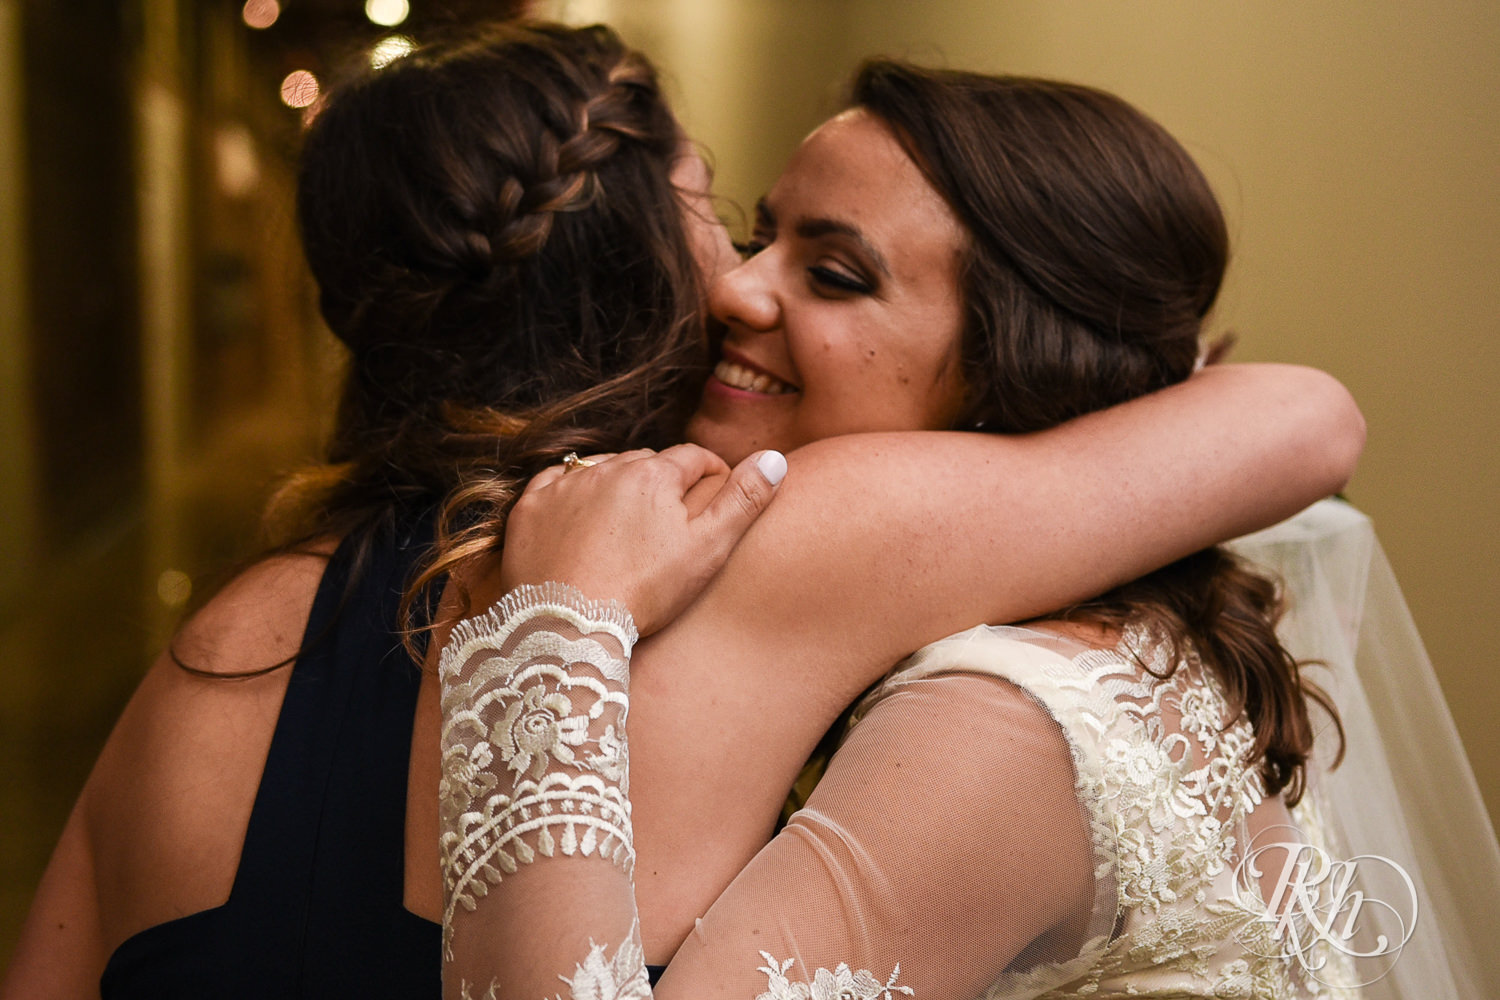 Bride and and groom hug guests after wedding ceremony at Paikka in Saint Paul, Minnesota.